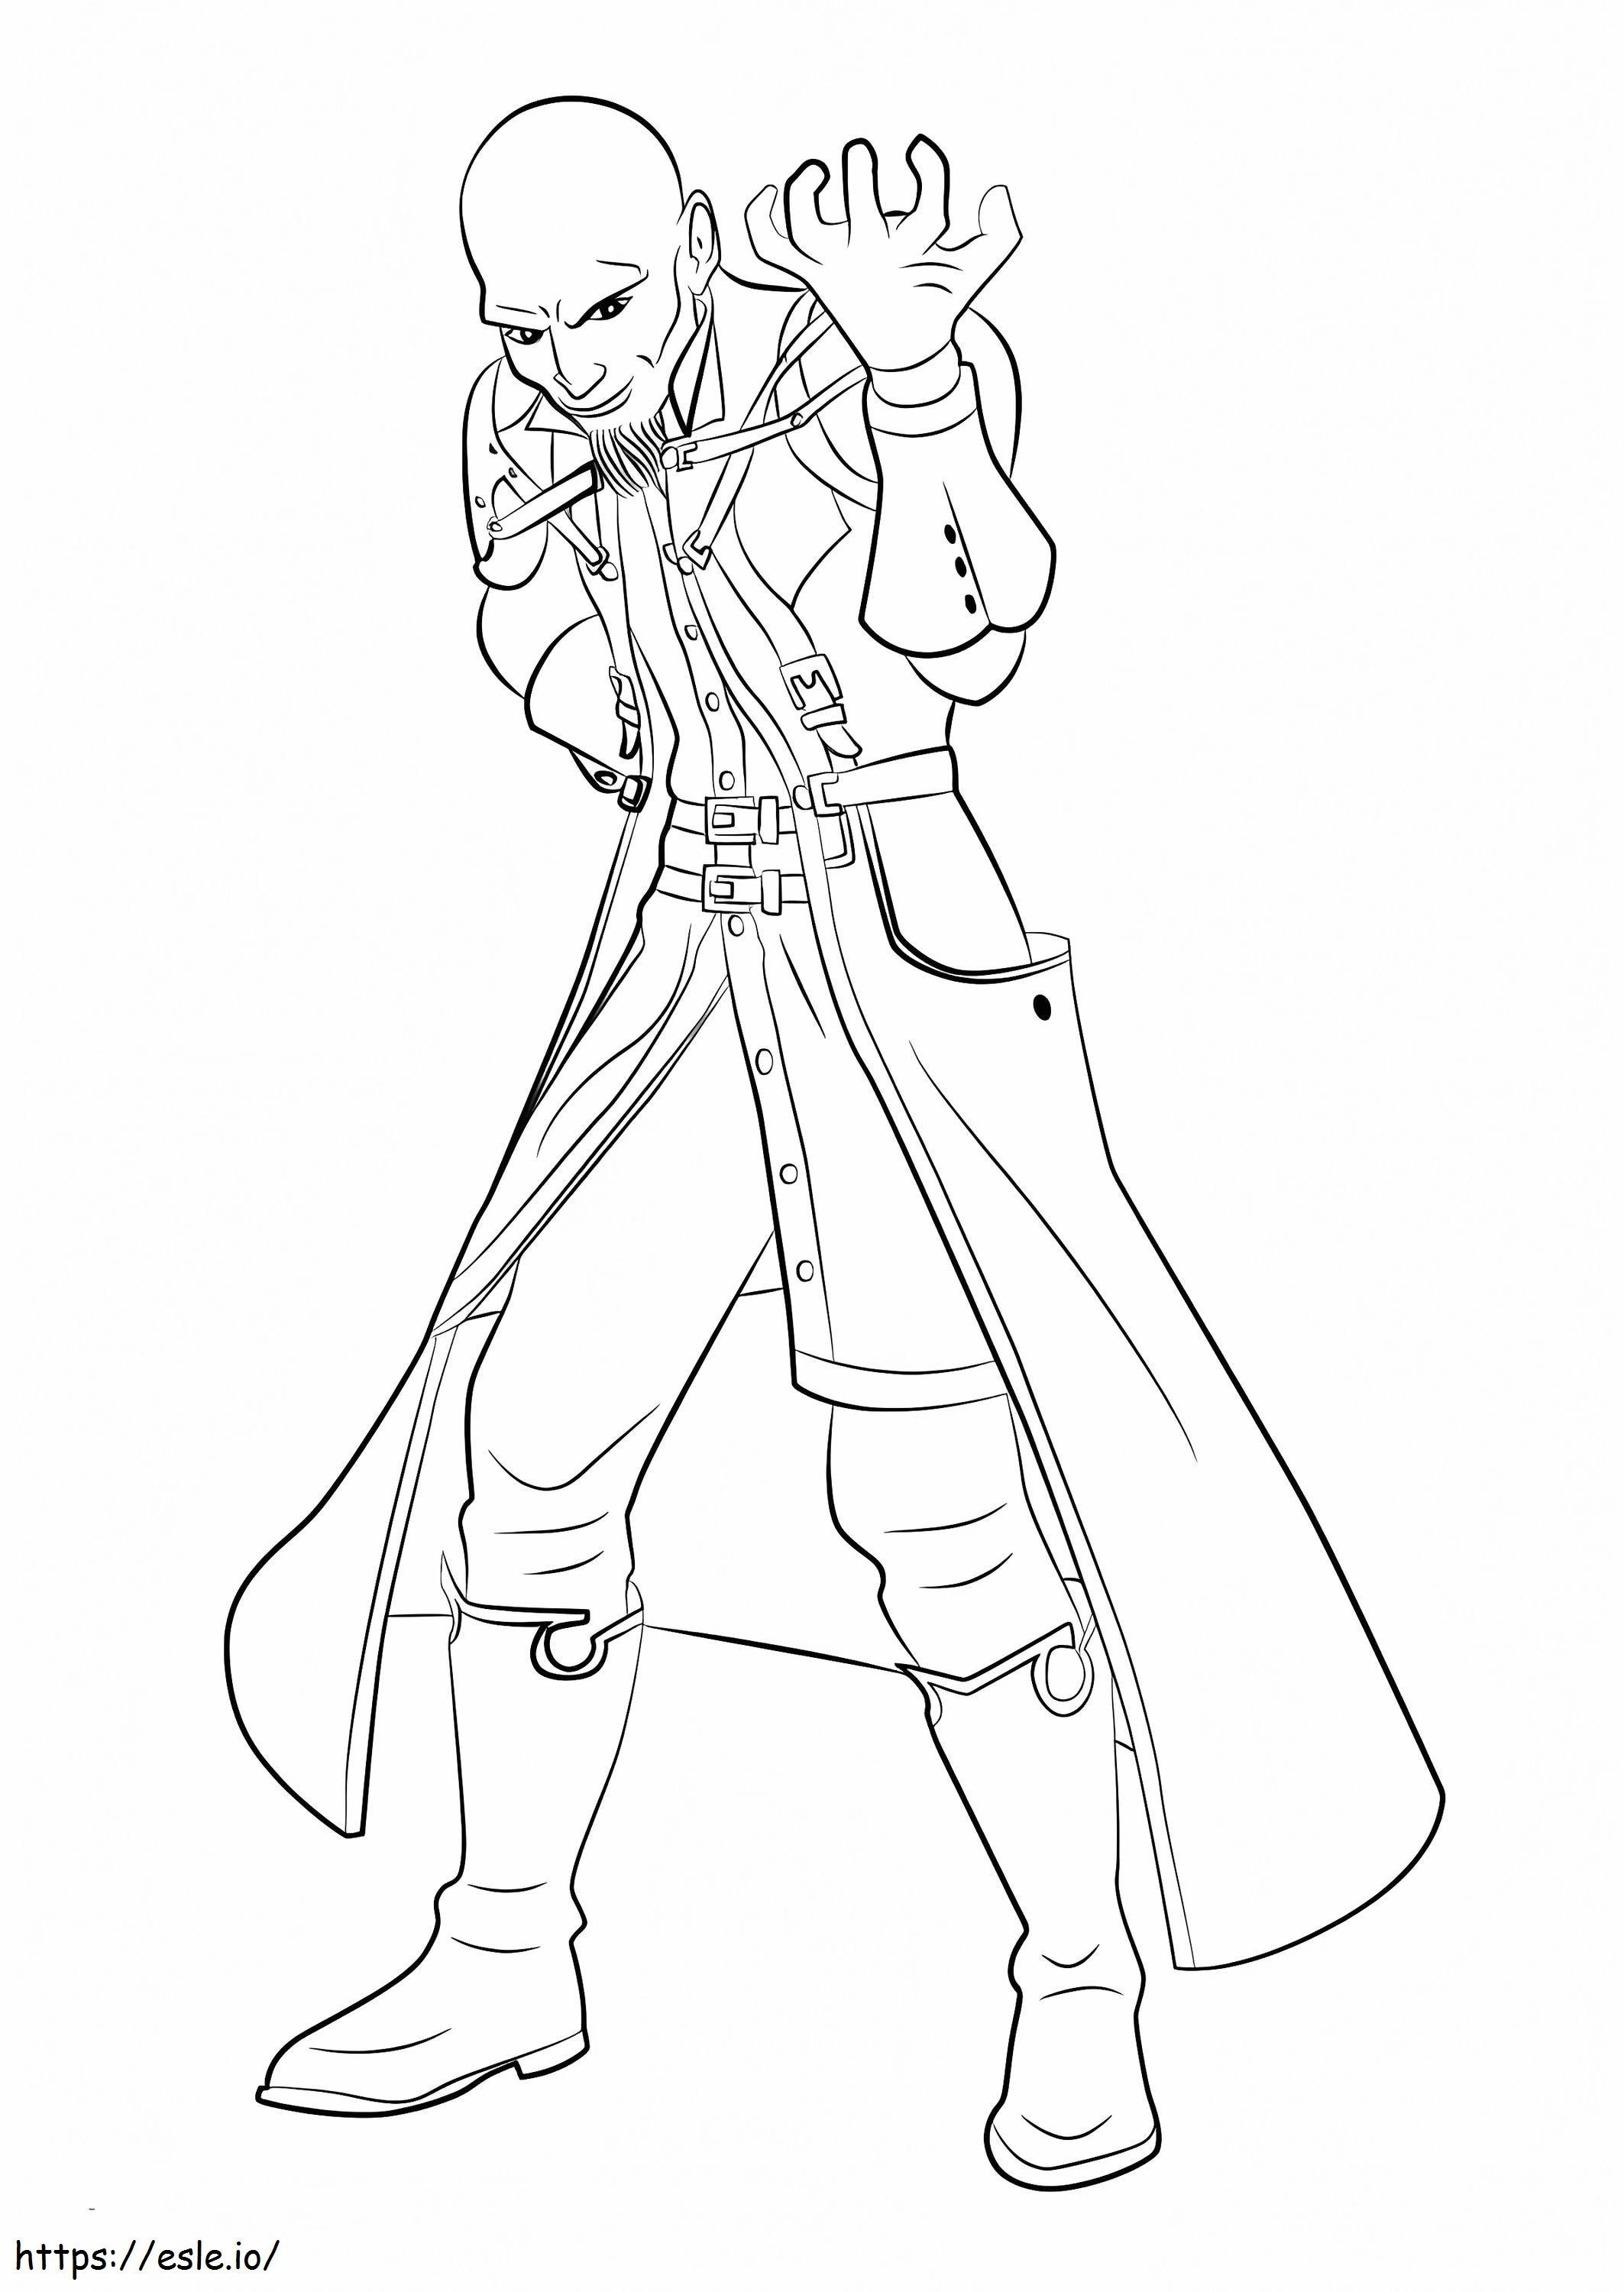 Master Xehanort coloring page